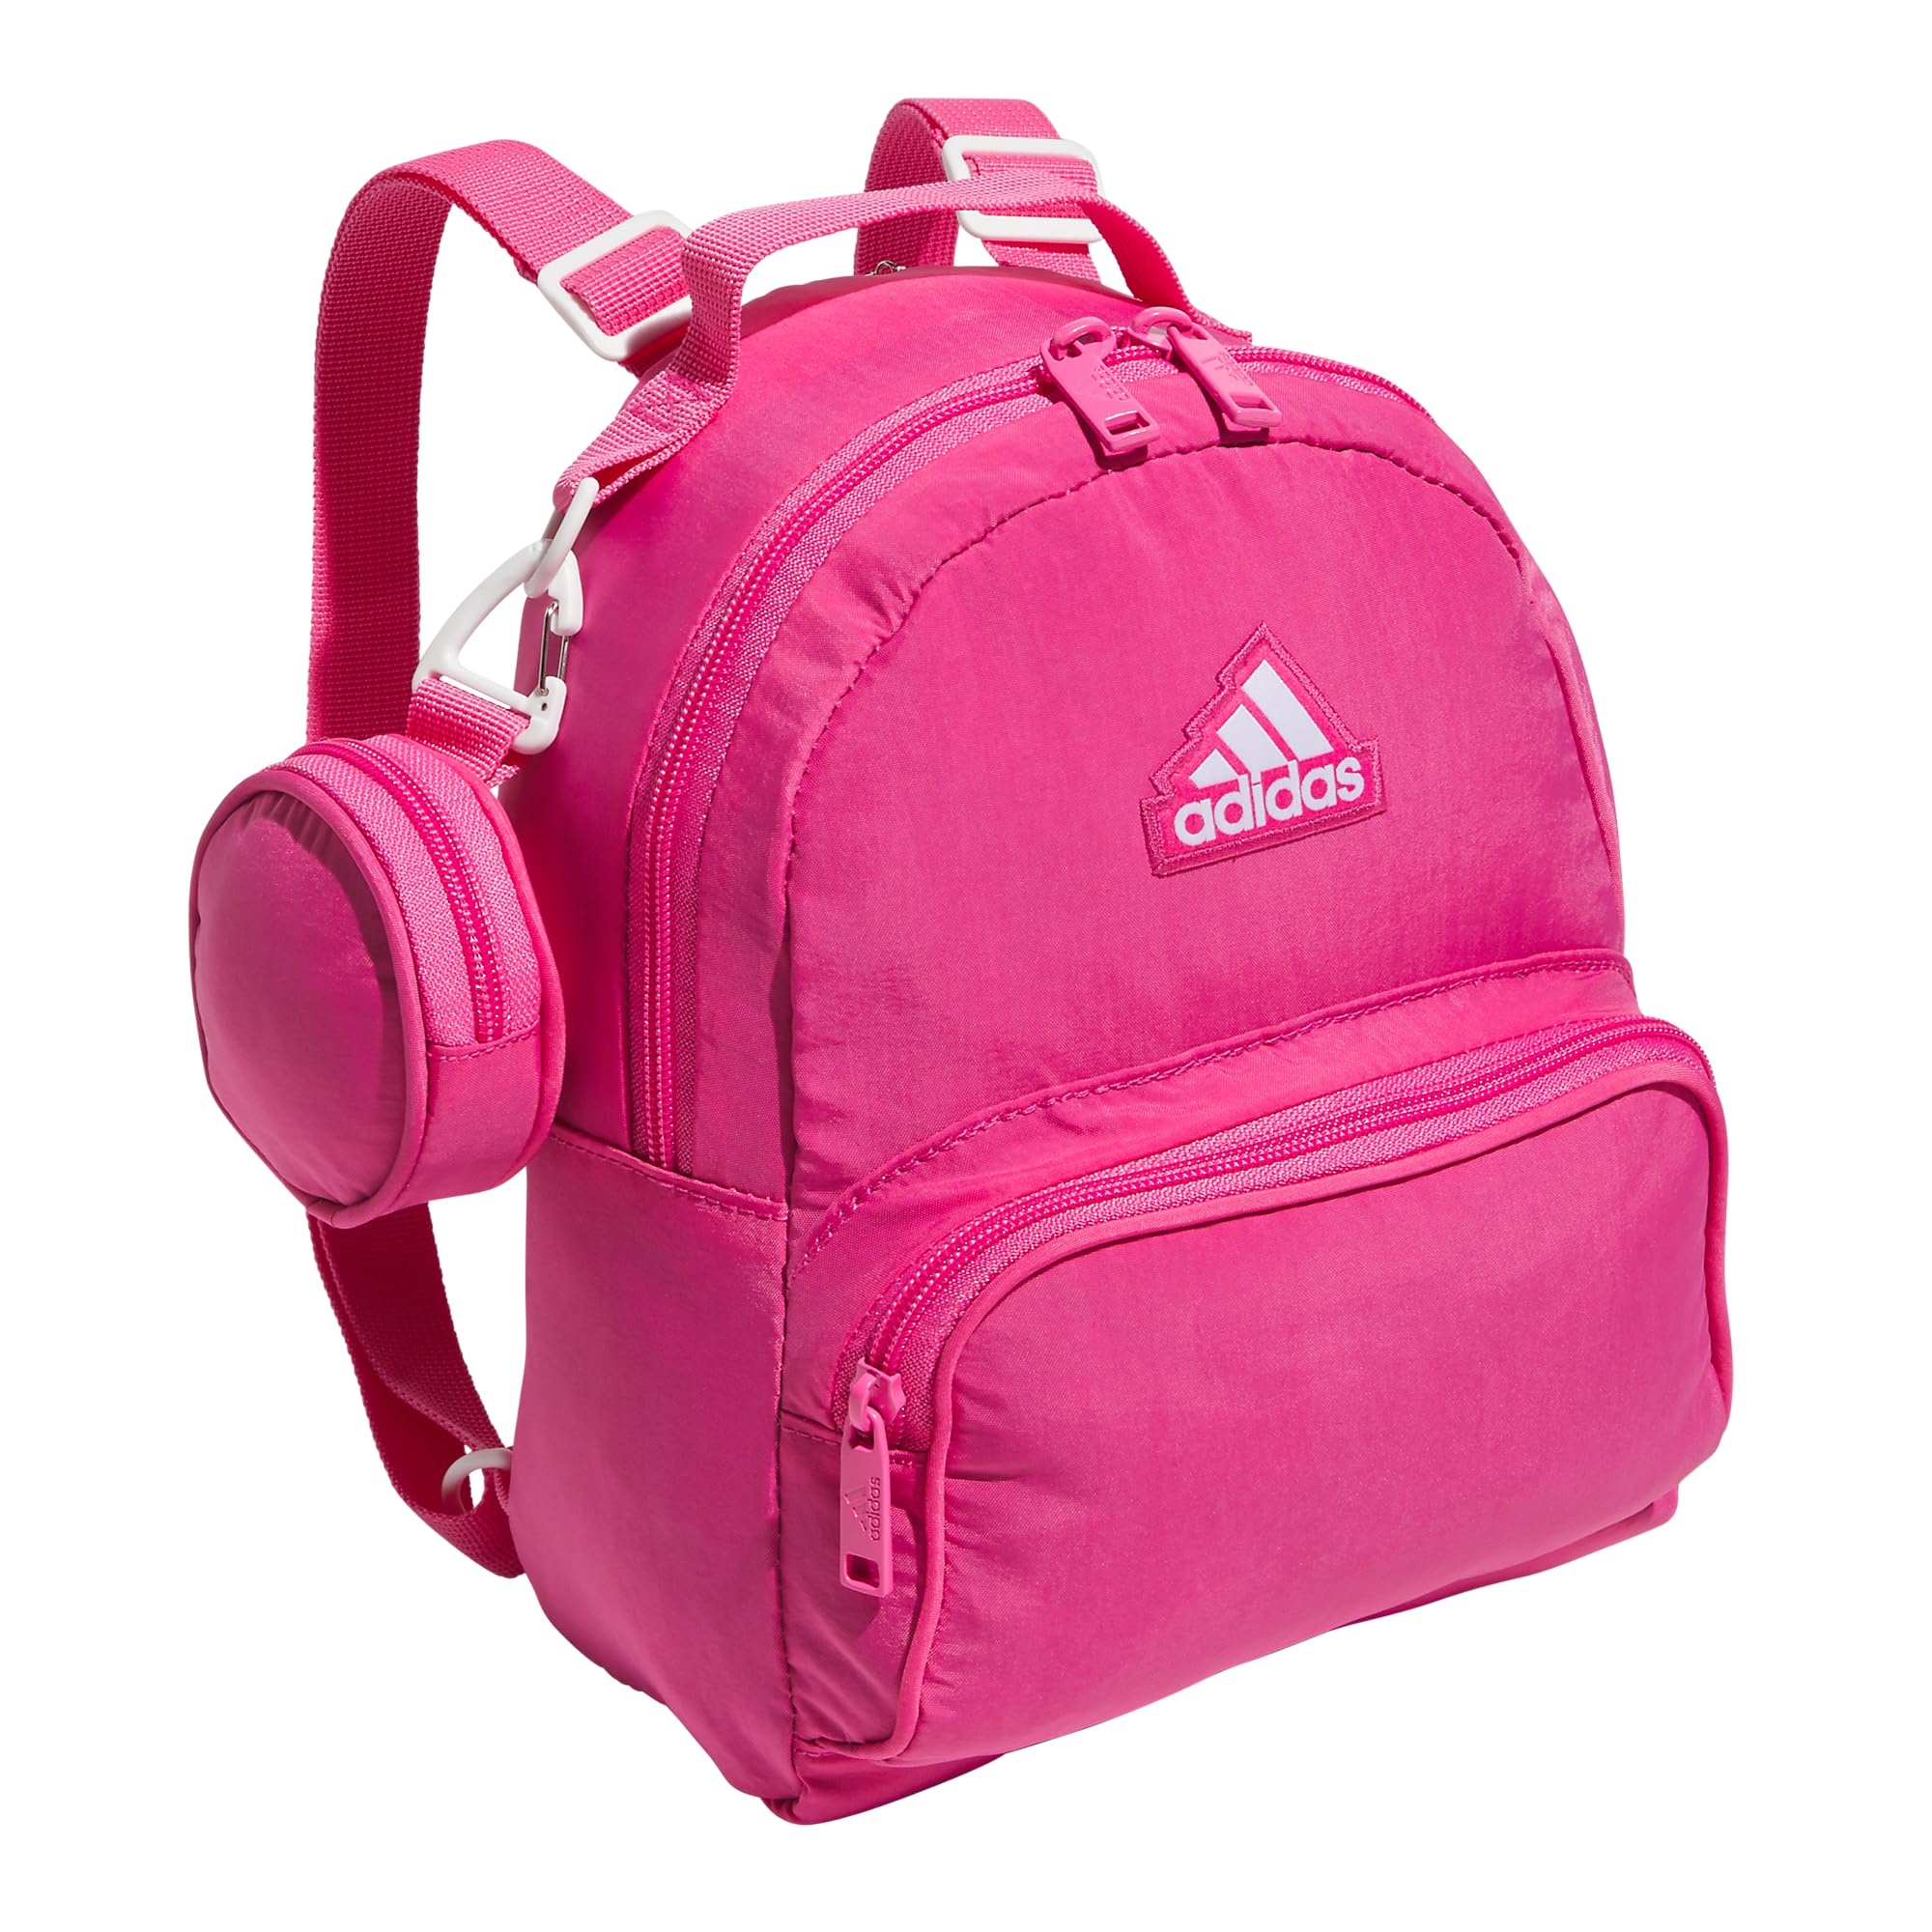 adidas Must Have Mini Backpack, Small Festivals and Travel, Pulse Magenta Pink/White, One Size